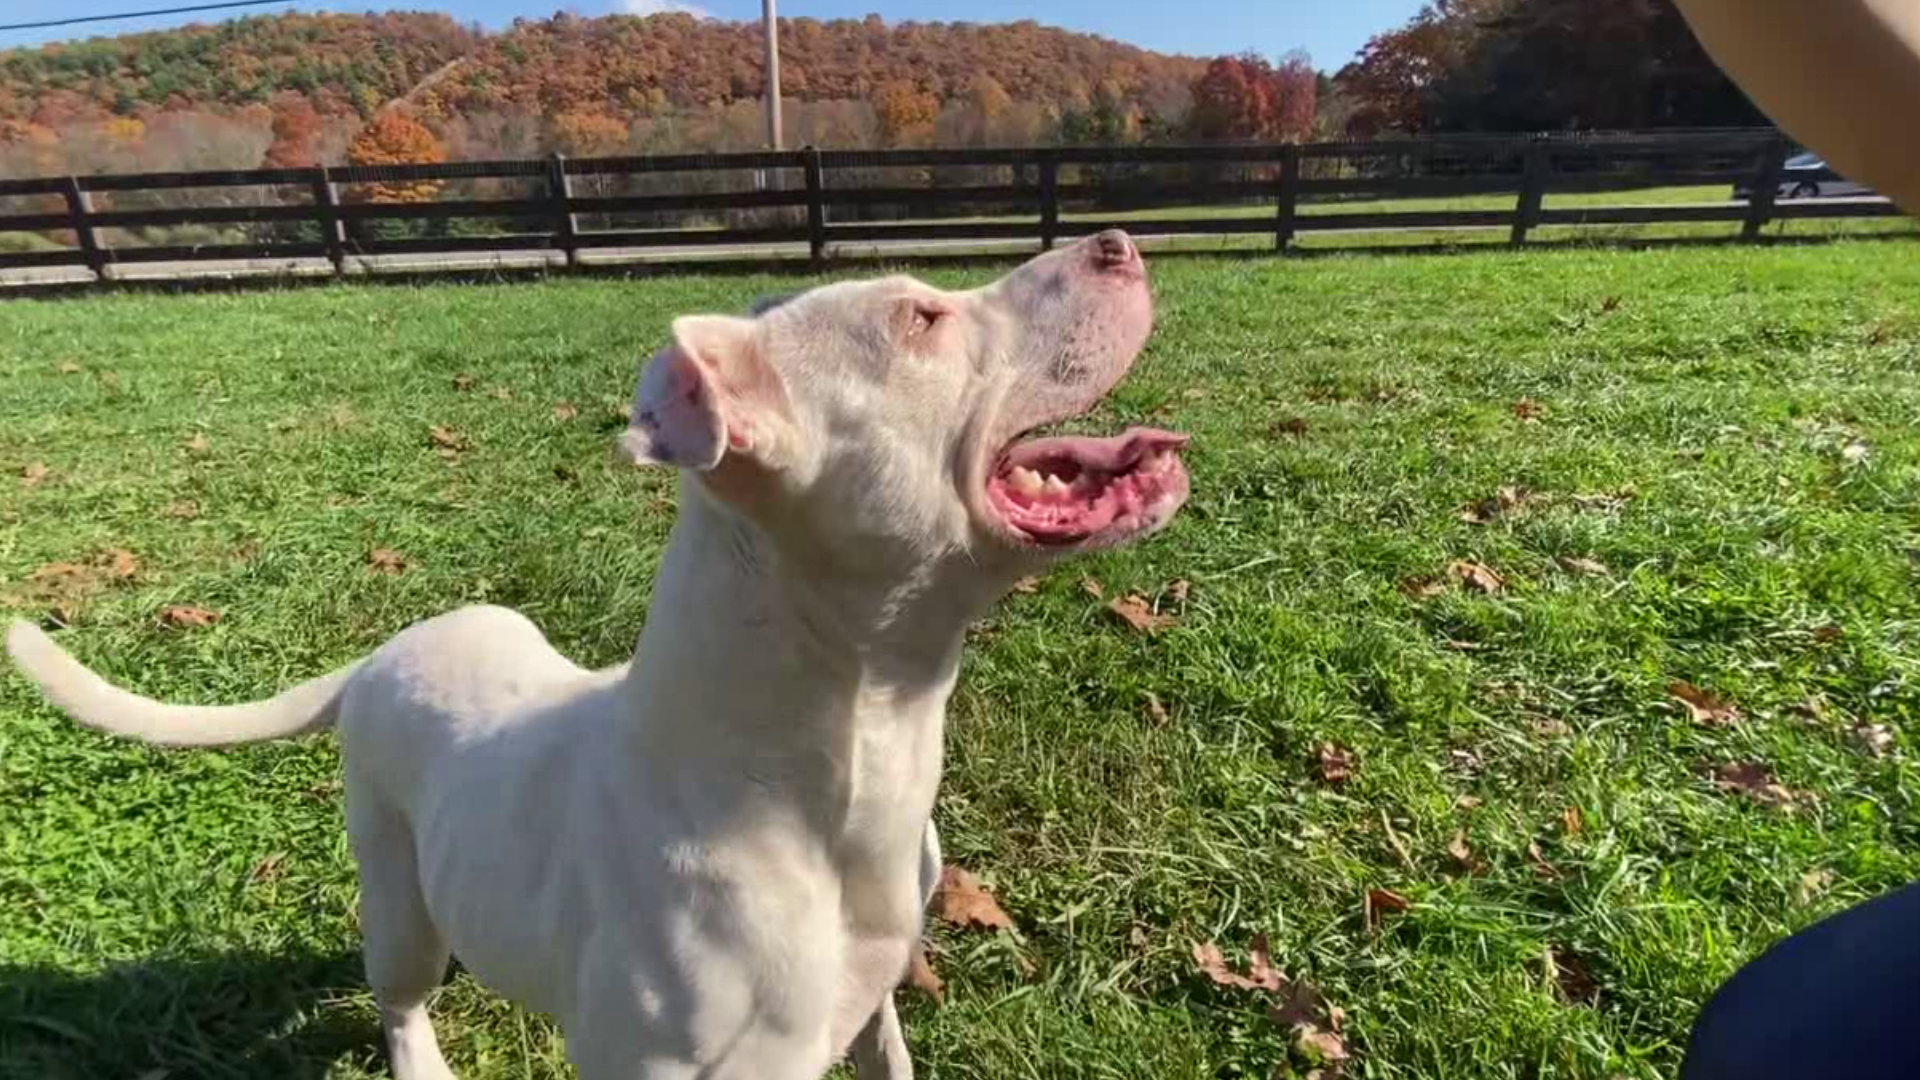 Crystal was saved from a high kill shelter in Texas and brought here to PA.